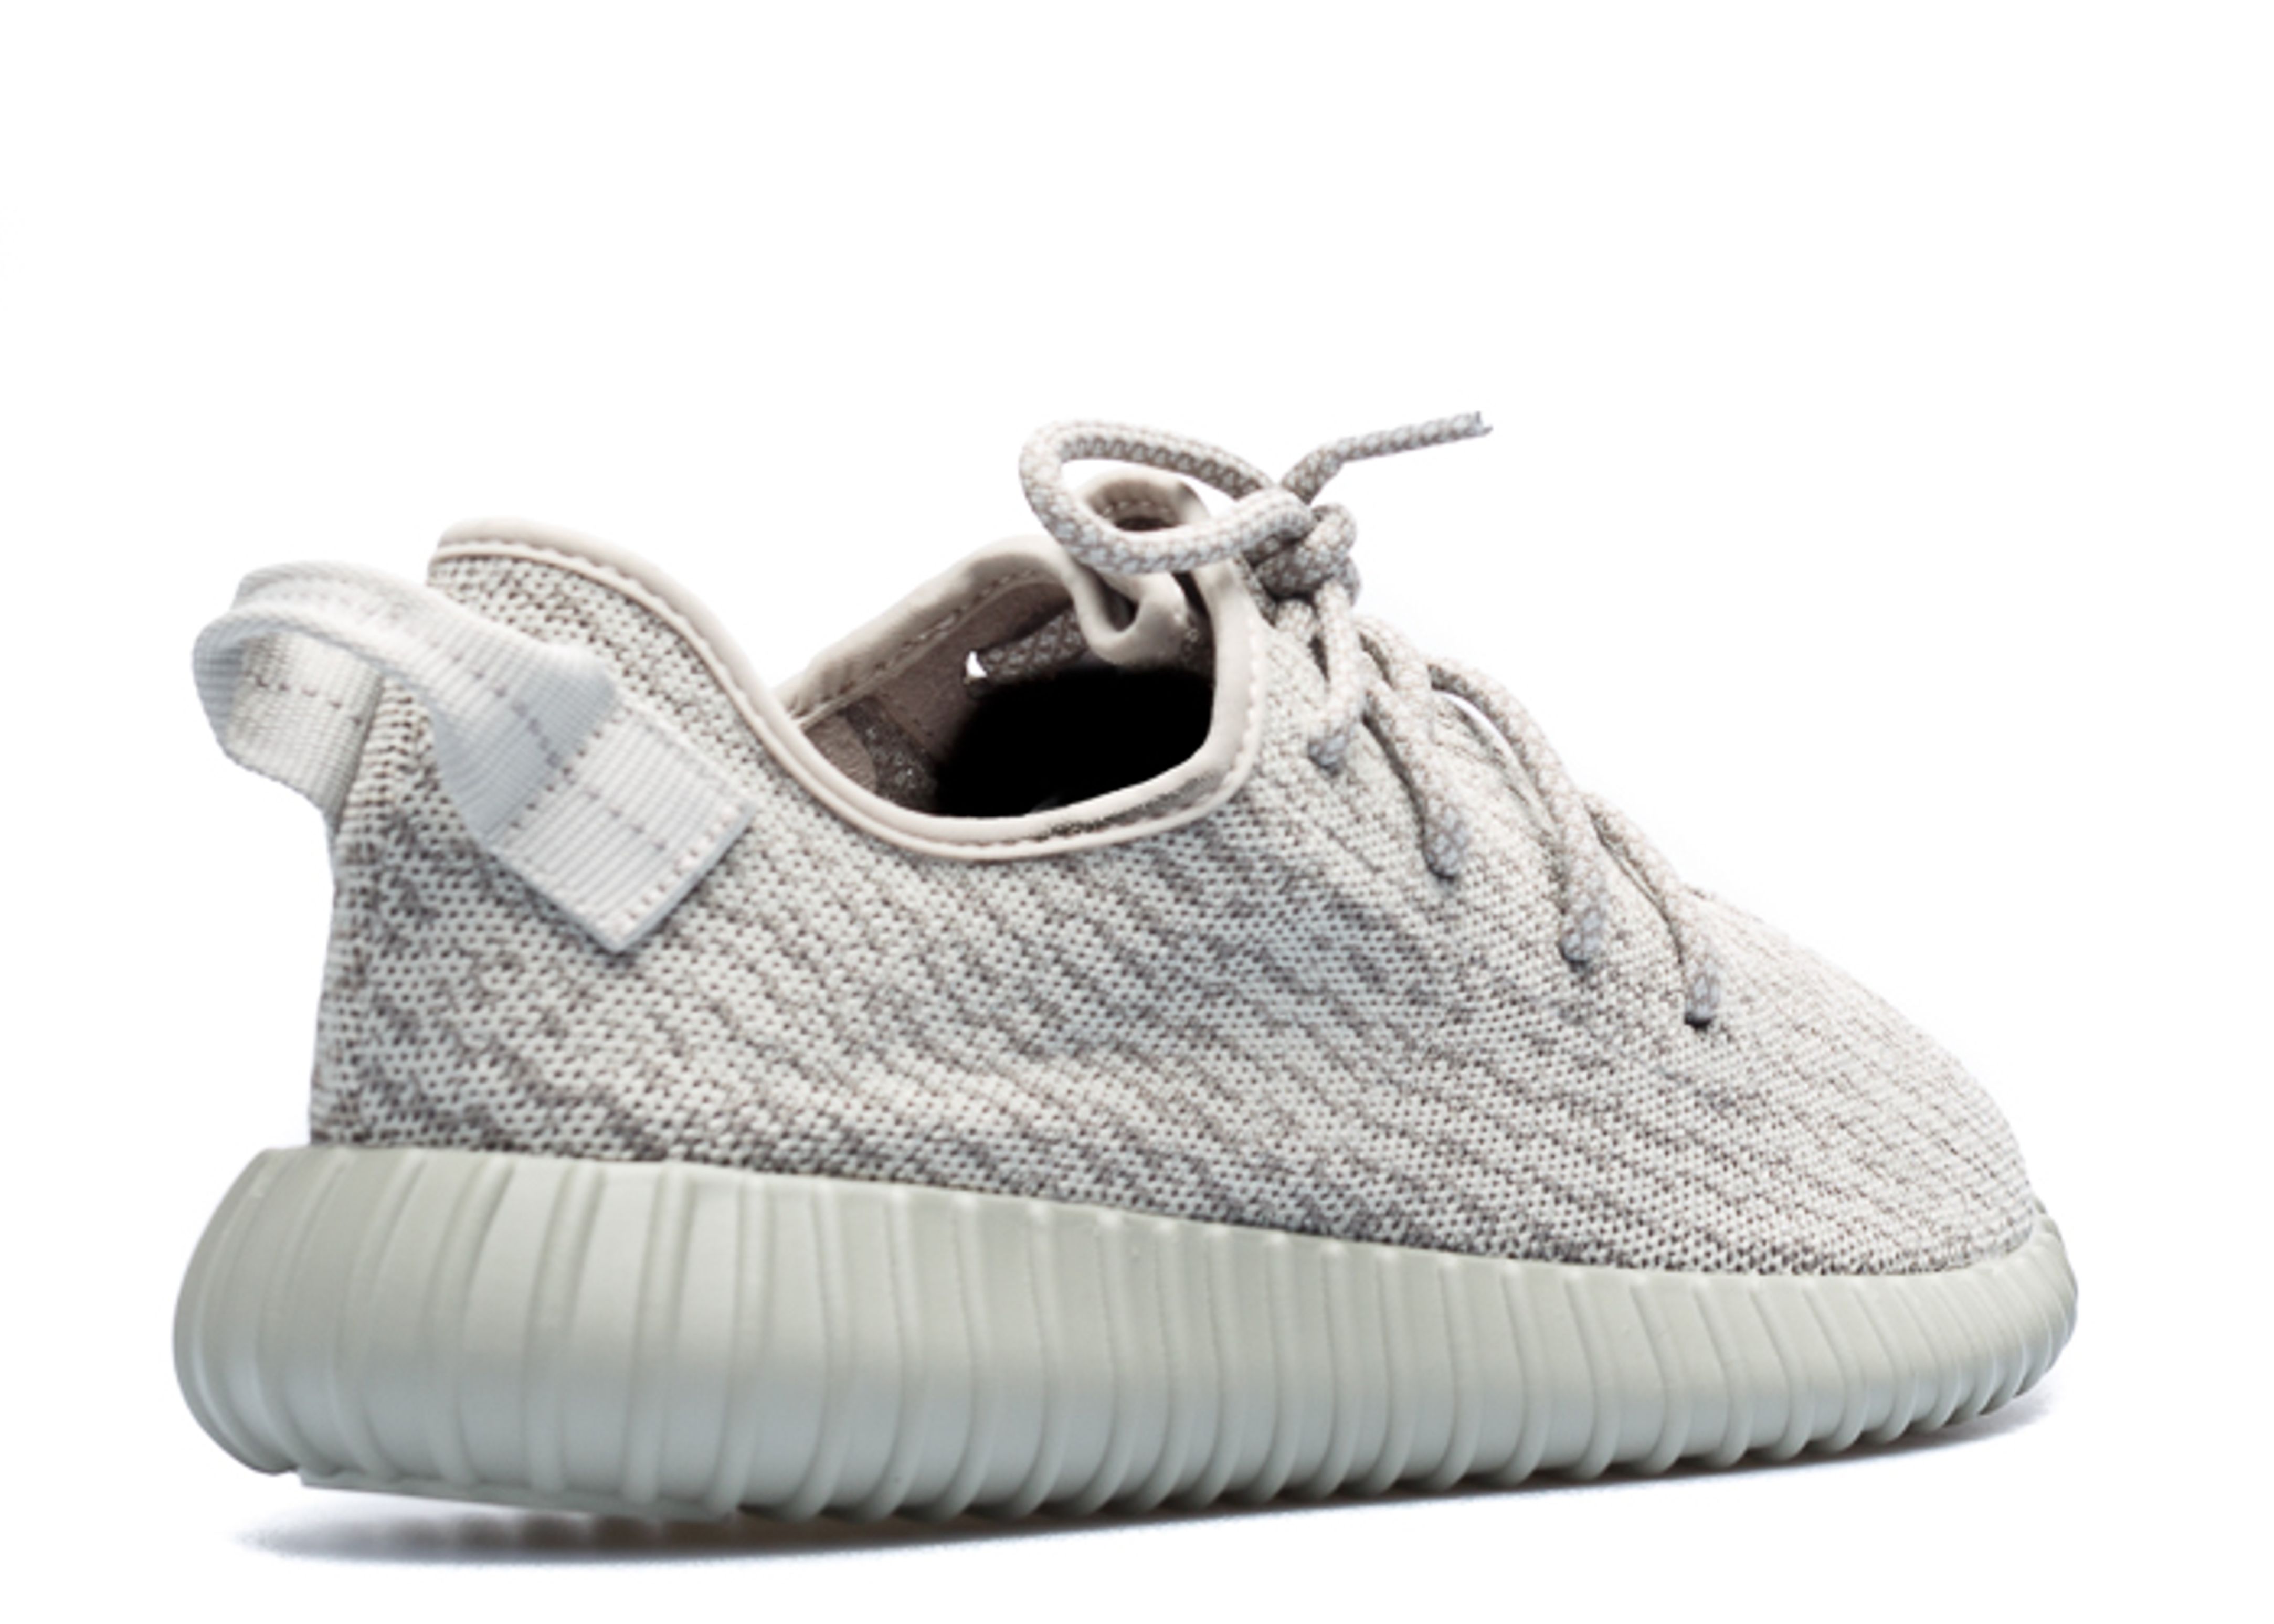 The adidas Yeezy Boost 350 Moonrock Release Created Chaos